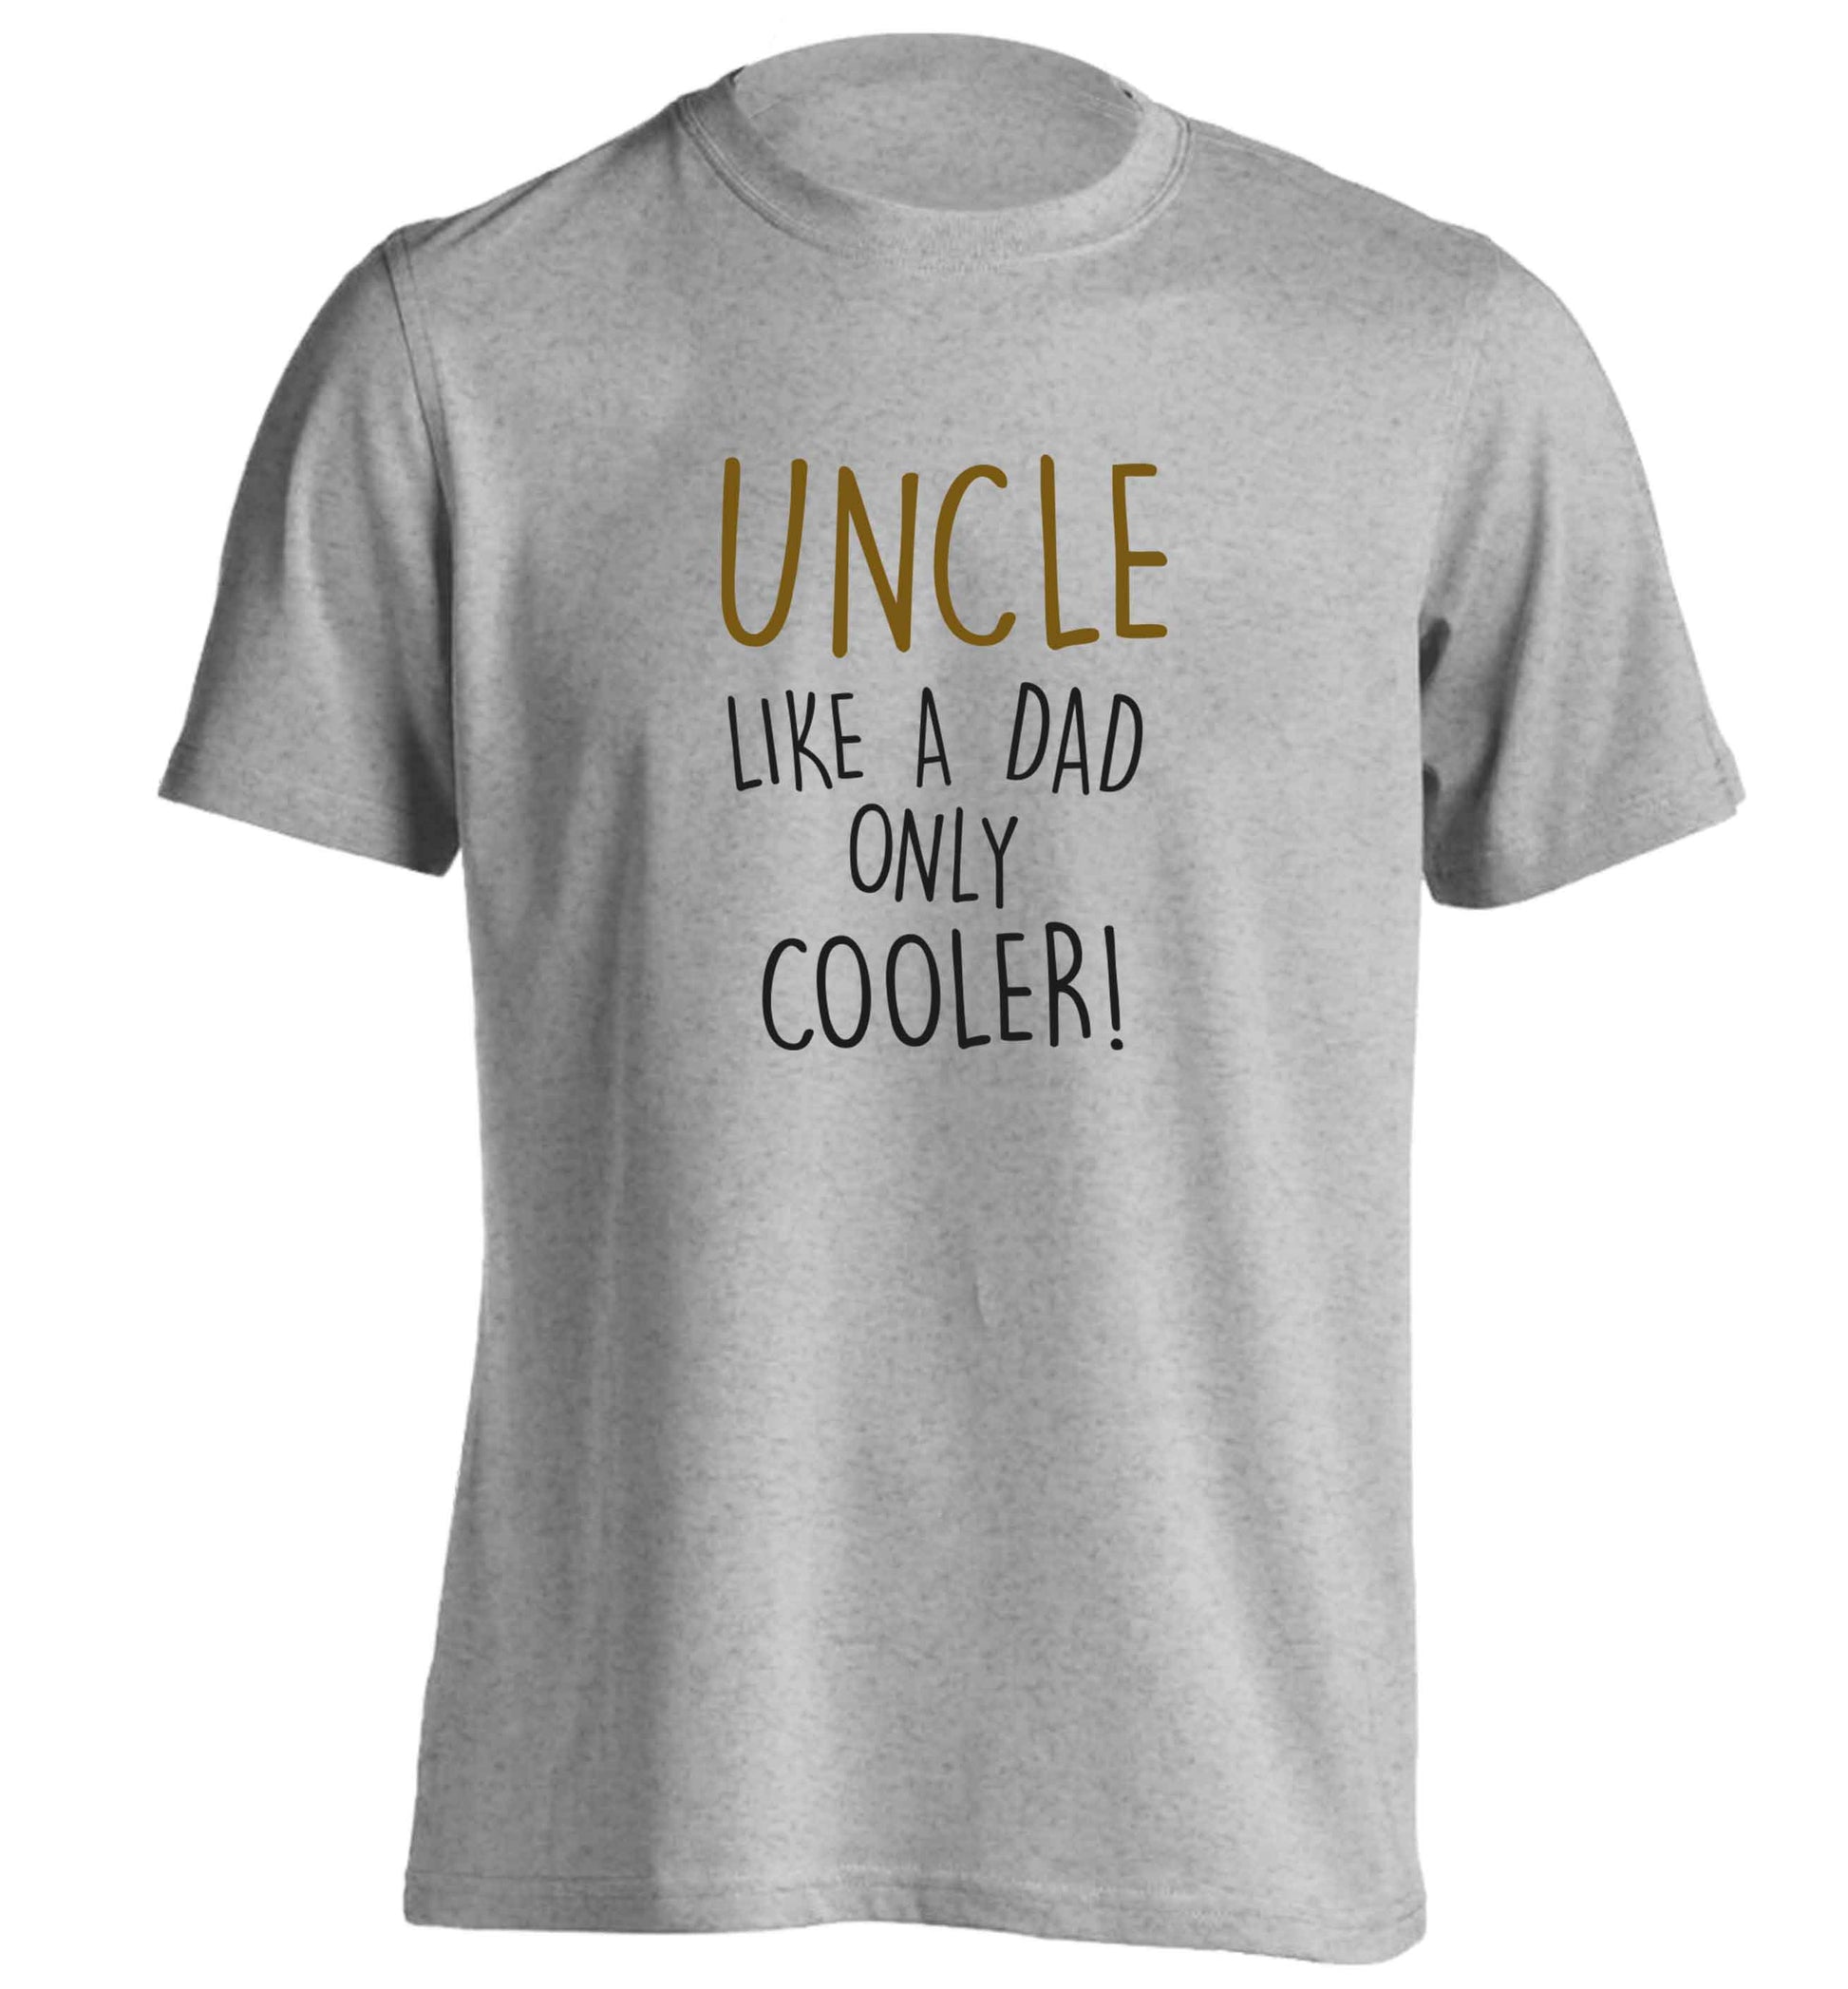 Uncle like a dad only cooler adults unisex grey Tshirt 2XL